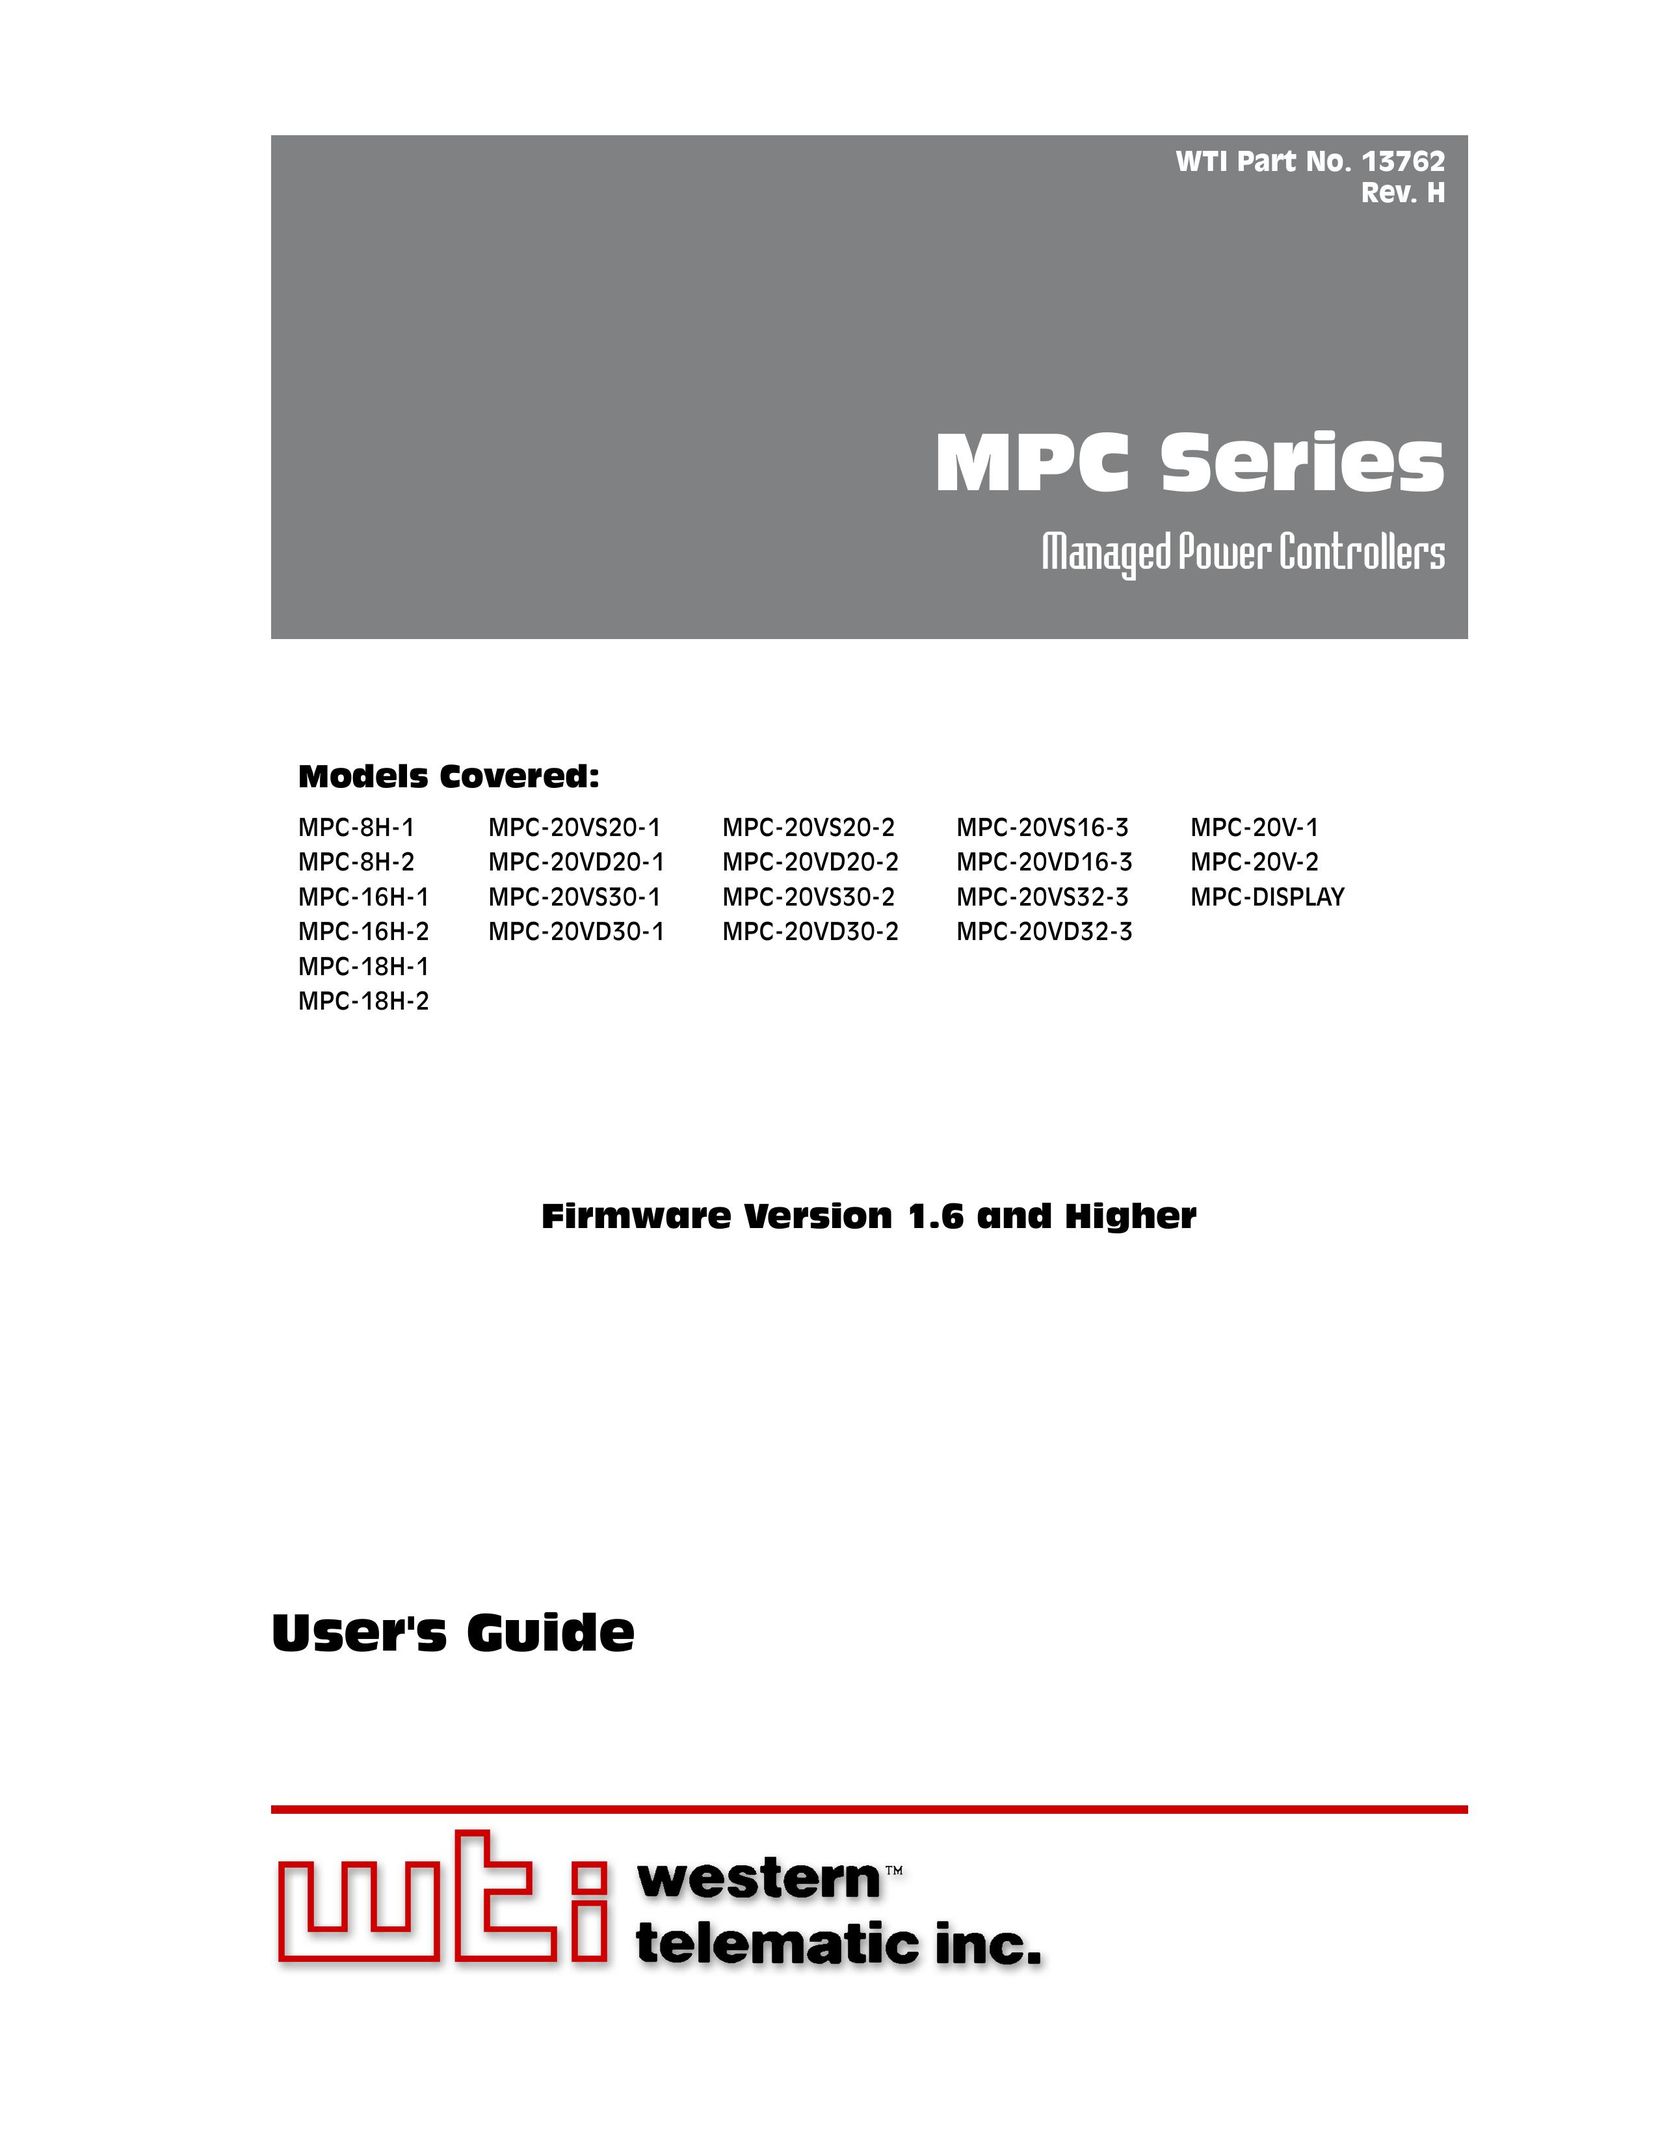 Western Telematic MPC-20VS32-3 Network Card User Manual